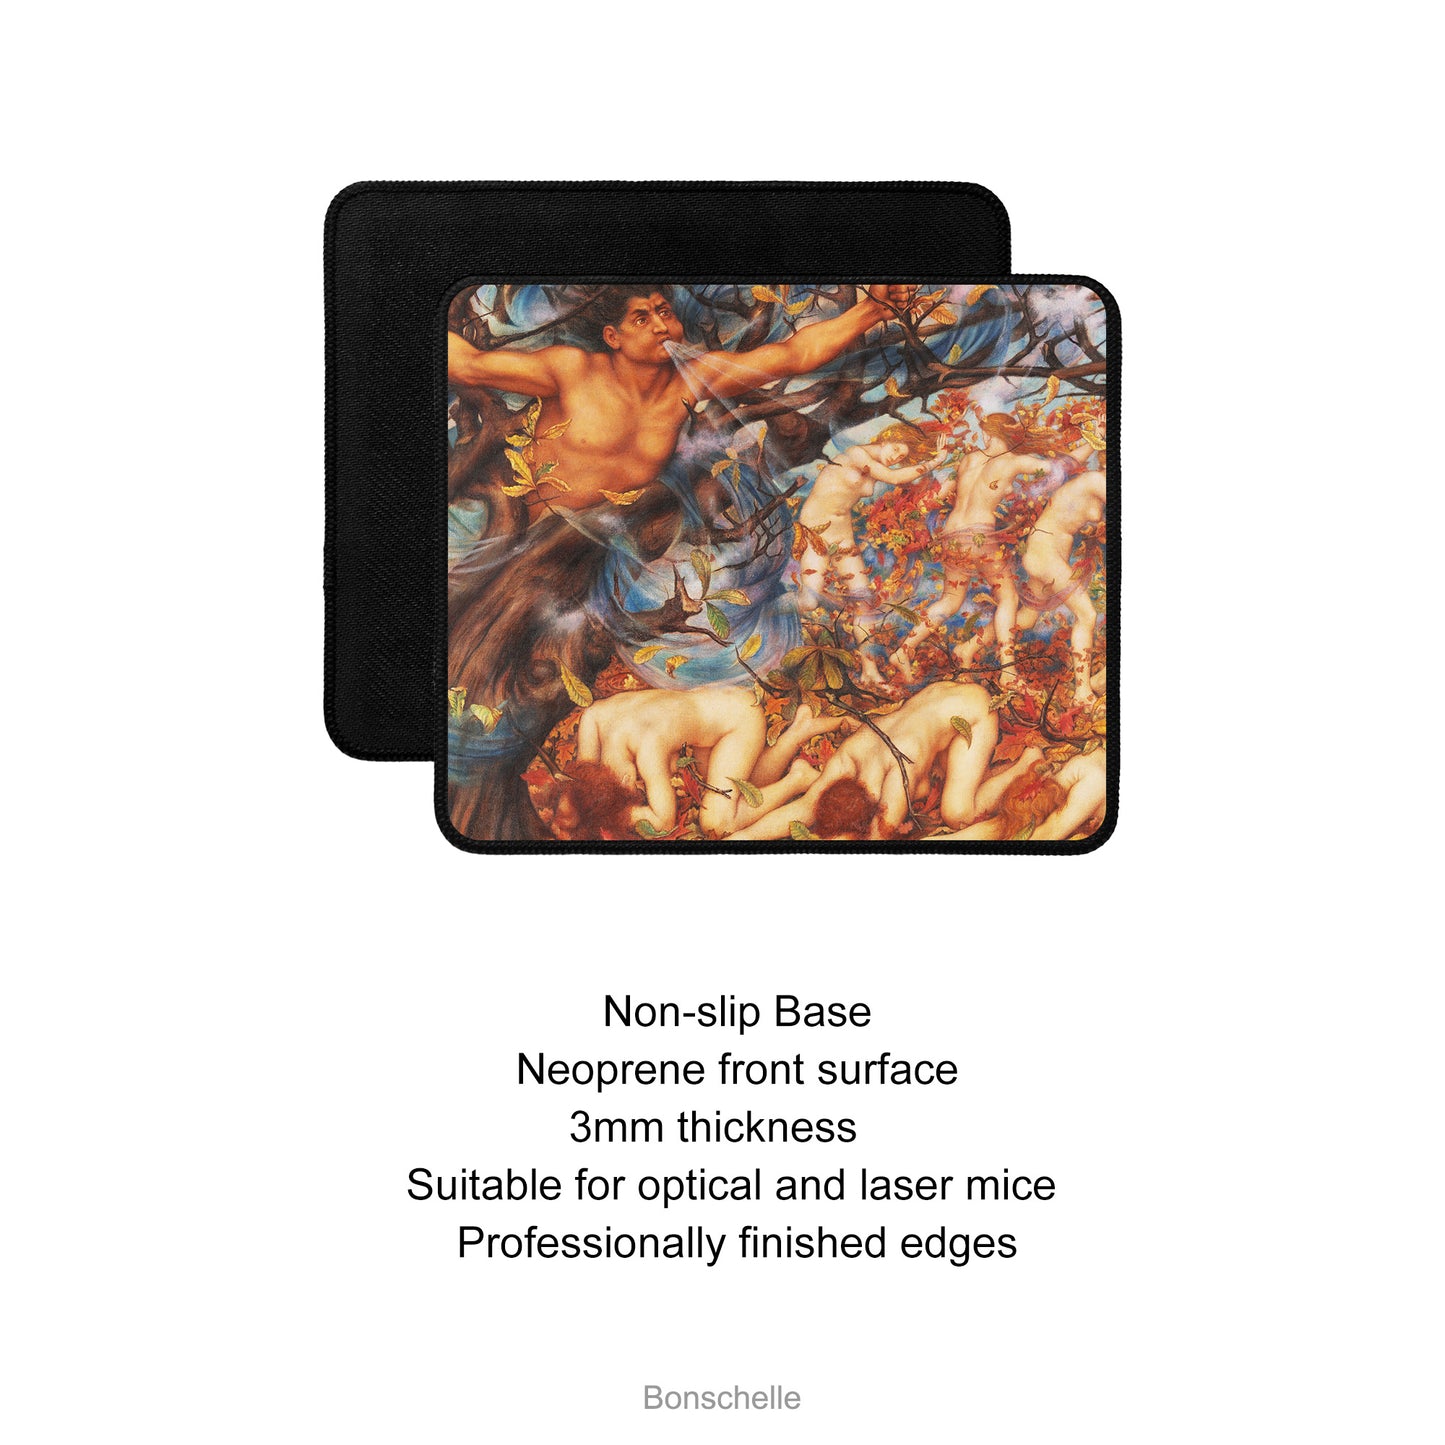 Gods, Angels, Nymphs and Serpents Mouse mats, Mouse Pads, Non Slip